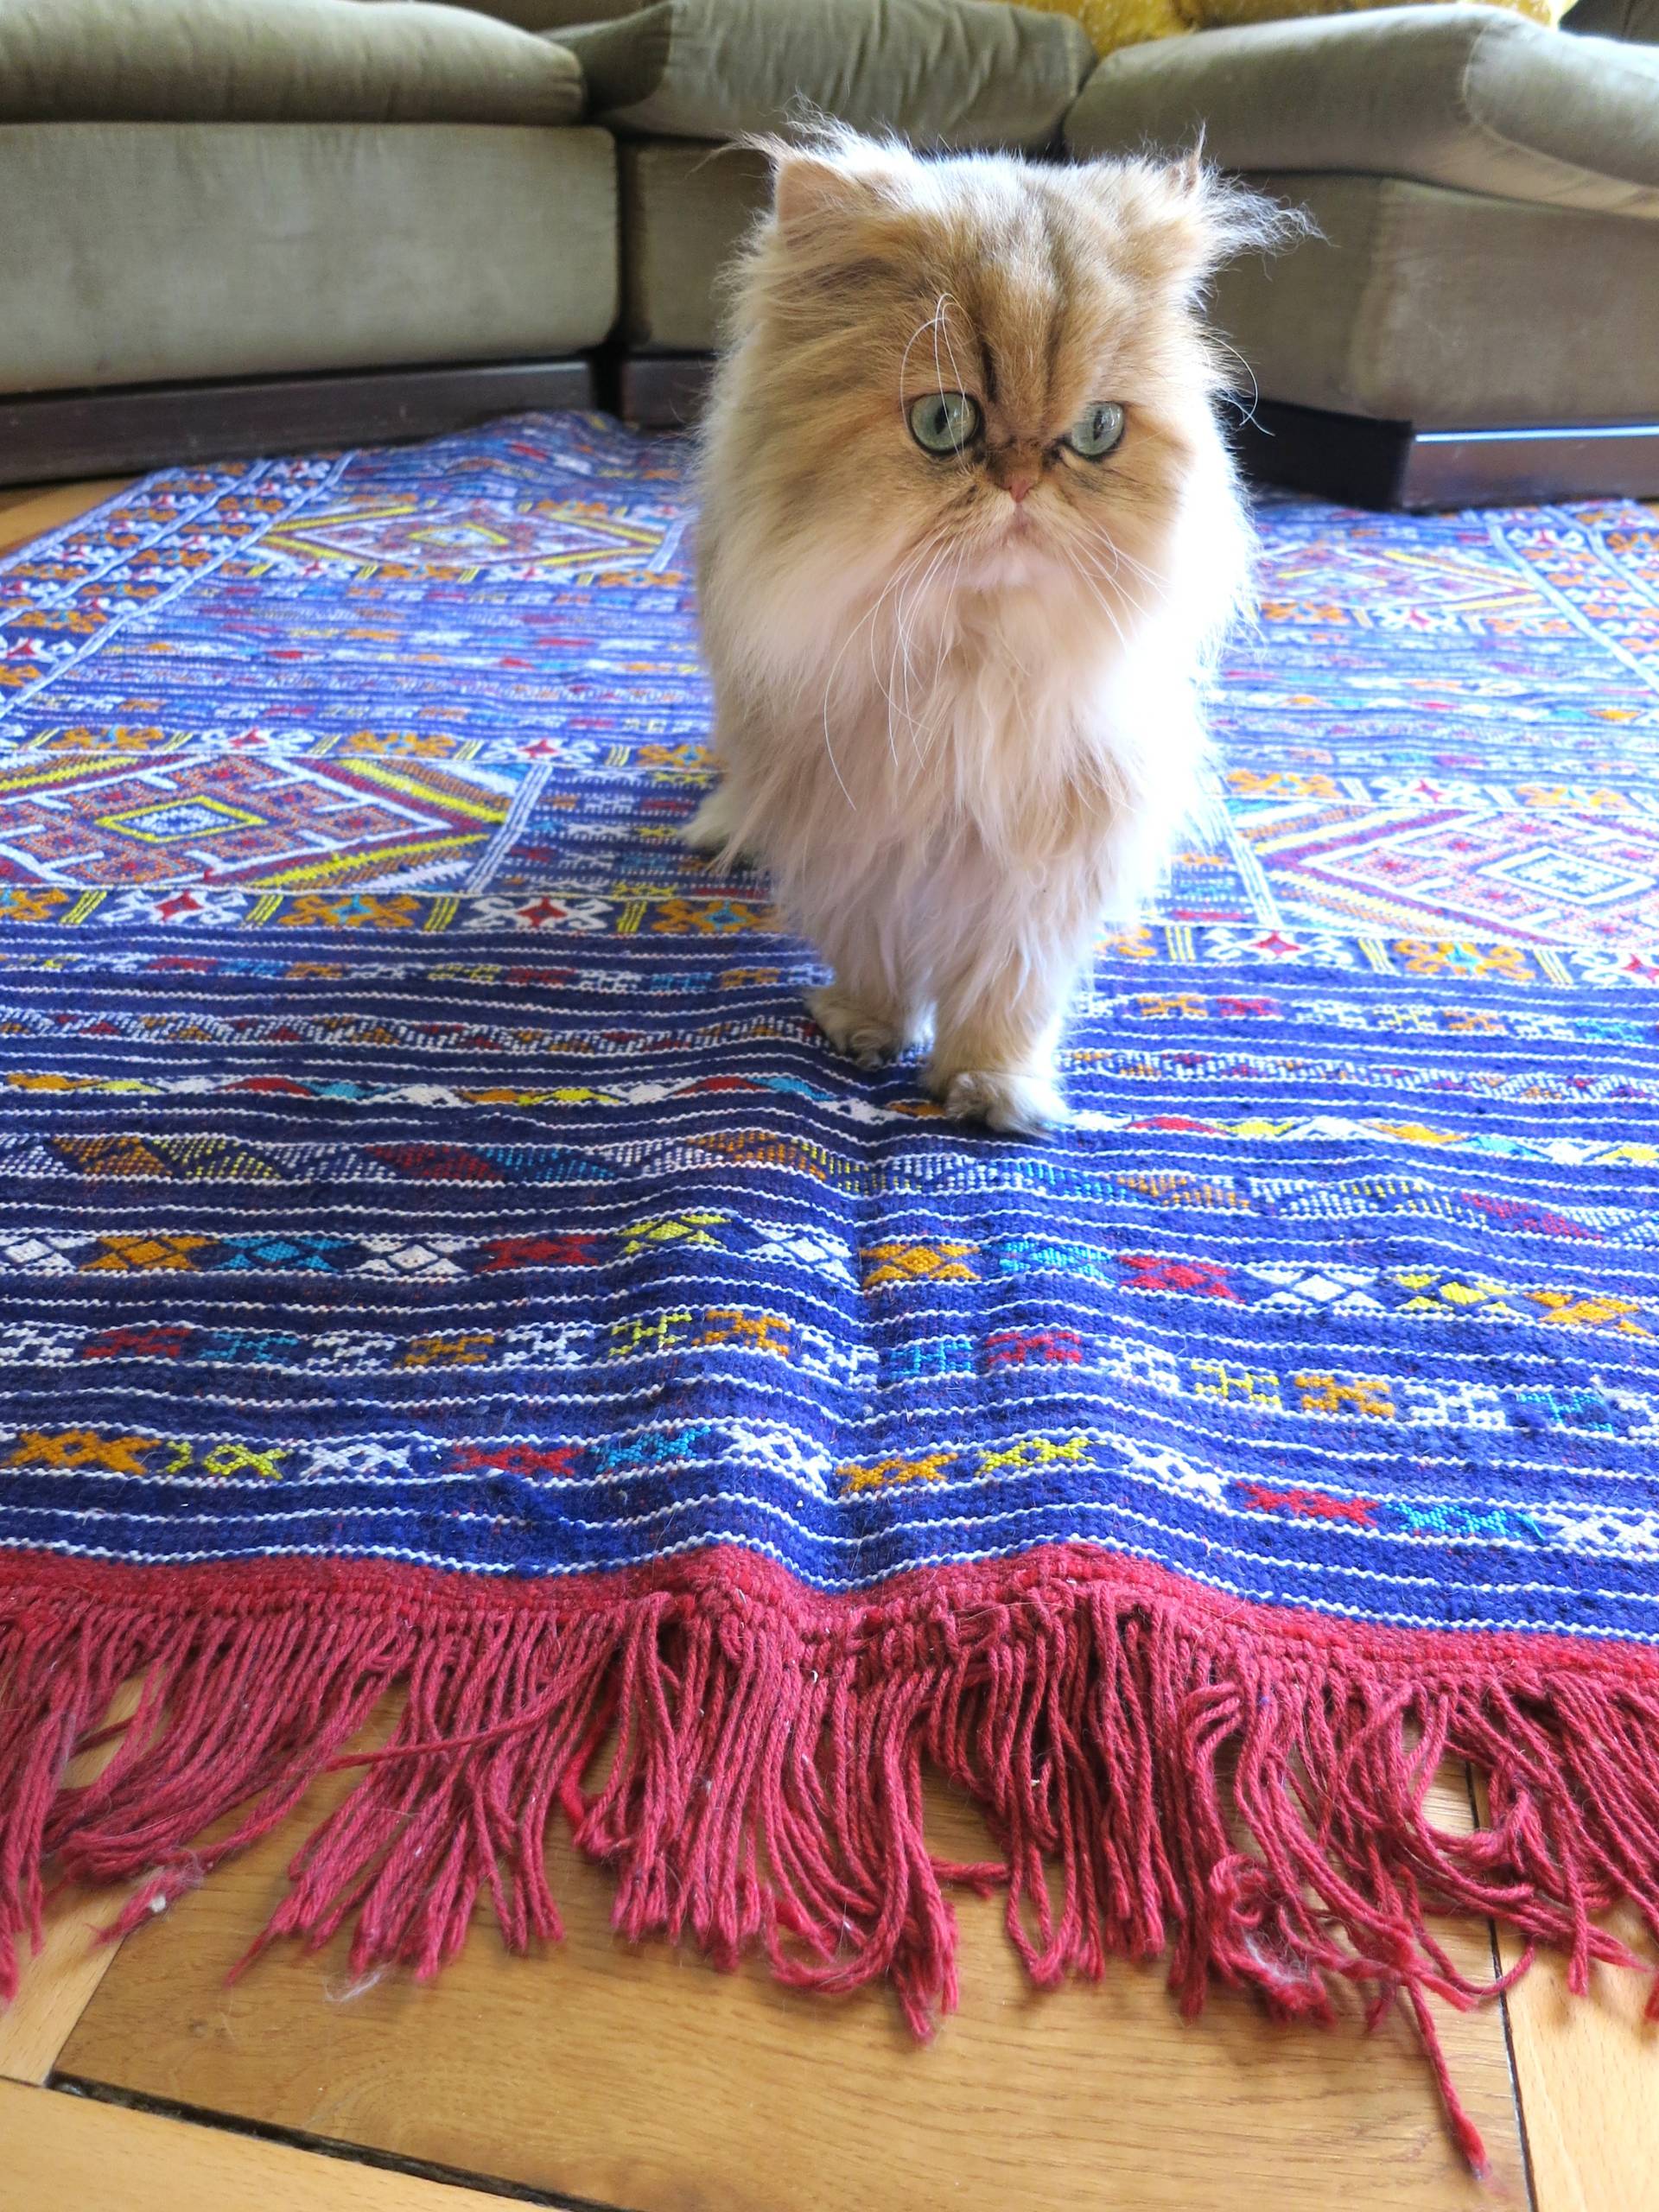 How to Choose a Rug for a Cat-friendly Home | Meow Lifestyle